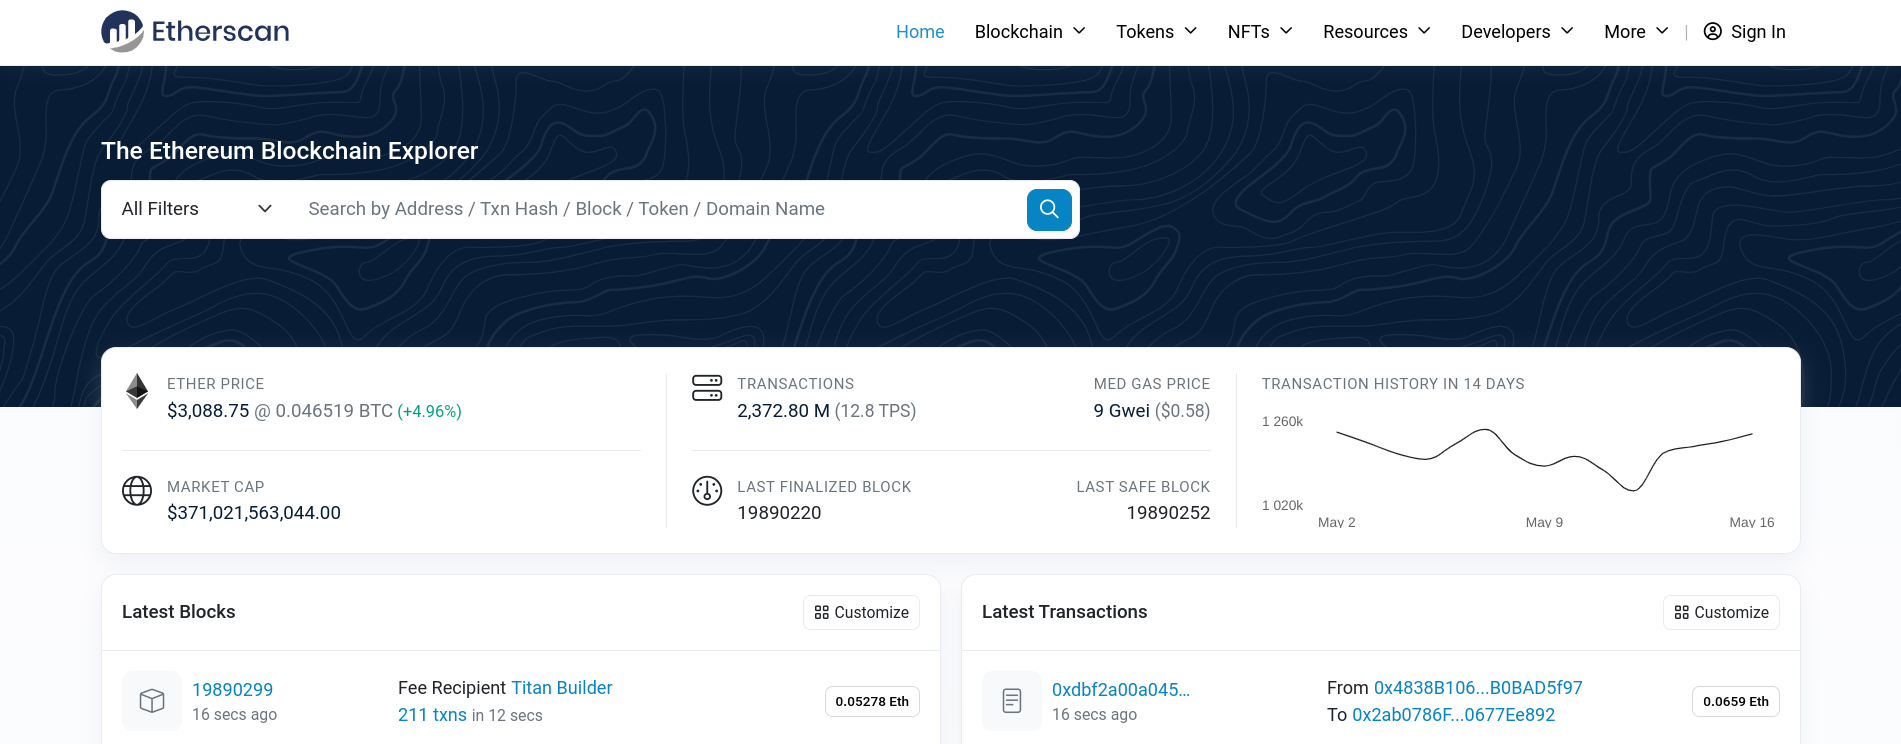 etherscan latest transactions